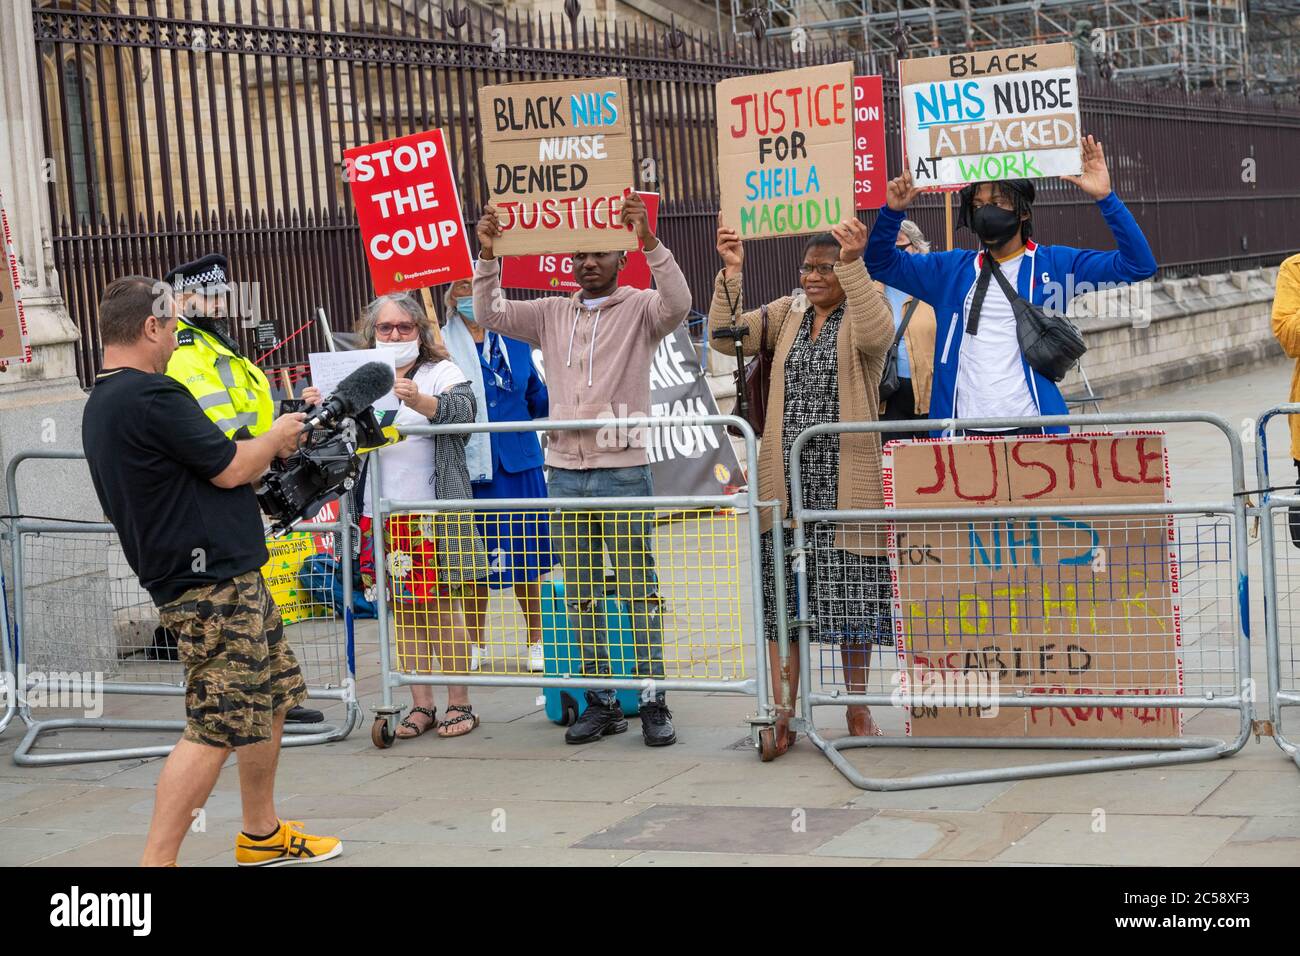 London, UK. 1st July, 2020. Boris Johnson, MP Prime Minister, arrives at the House of Commons with heightened, security. These demonstrators on the pavement were kept several meters away from the entrance and the the pavement on the other side of the road was sealed off. Credit: Ian Davidson/Alamy Live News Stock Photo